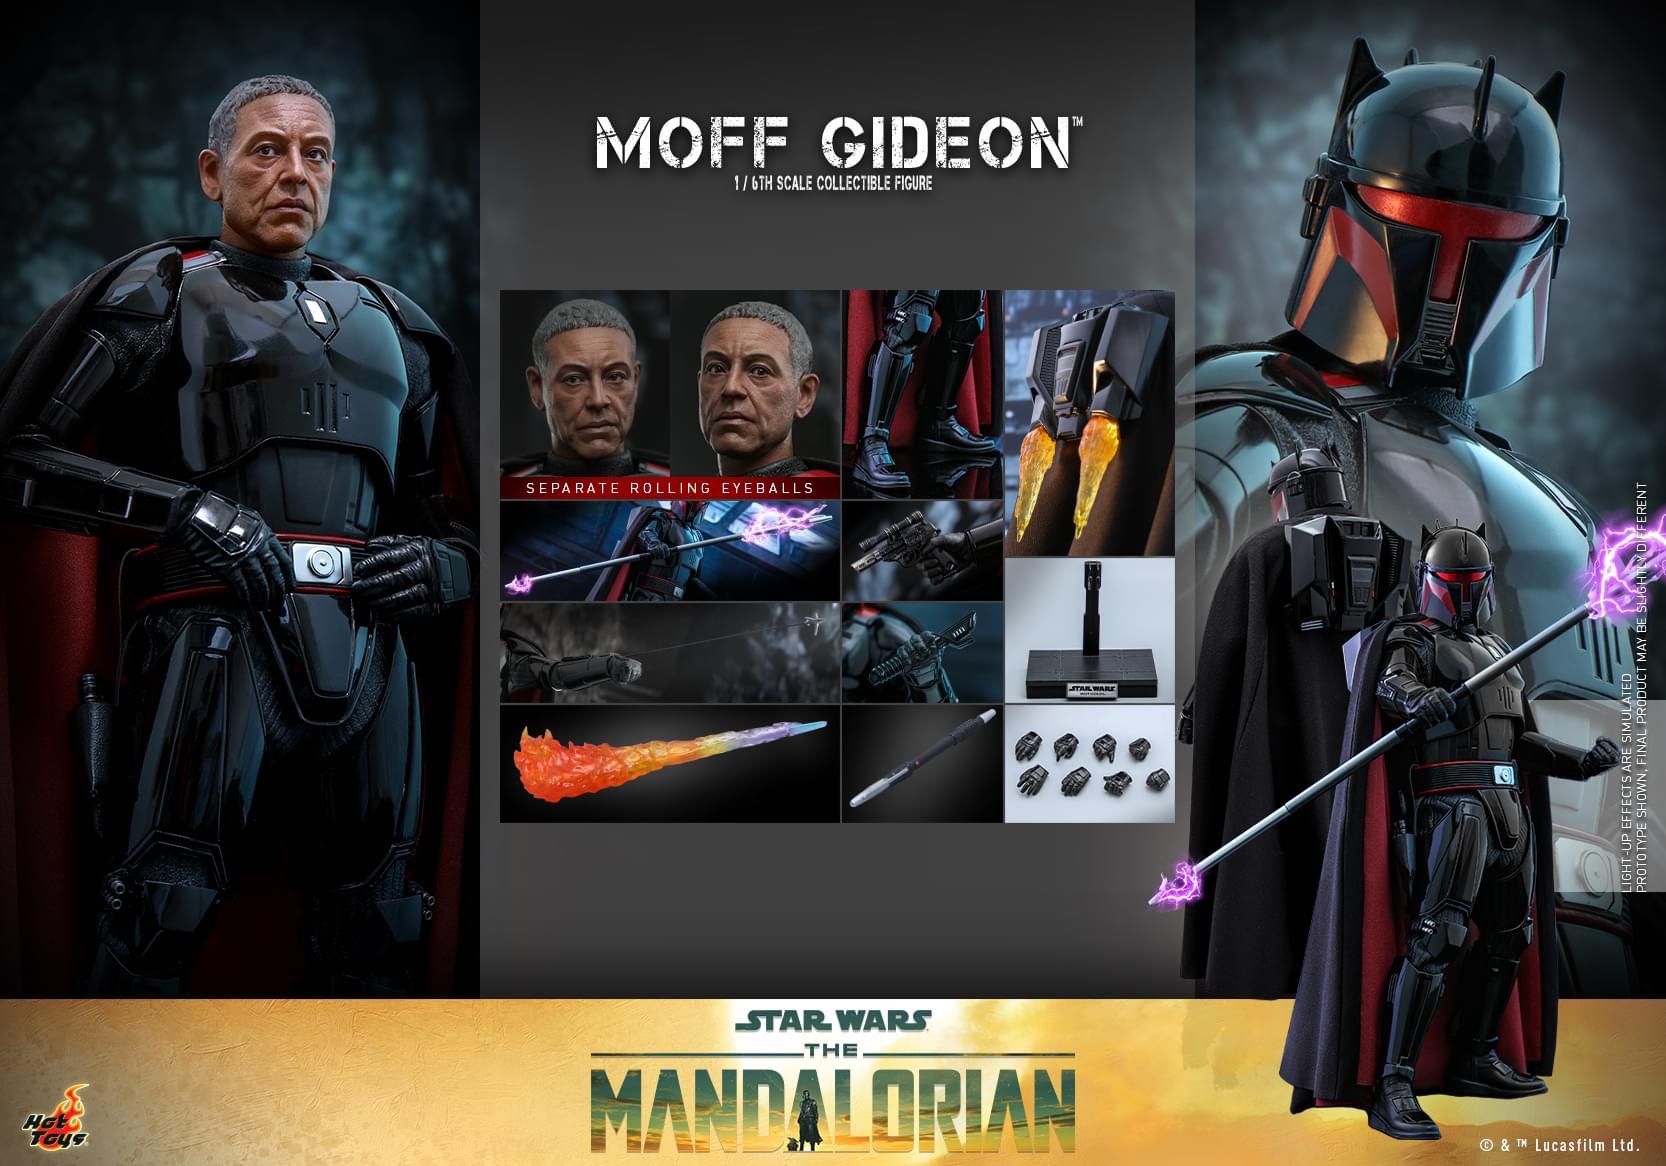 HOT TOYS TMS107 【Star Wars: The Mandalorian™ - 1/6th scale Moff Gideon™ Collectible Figure】